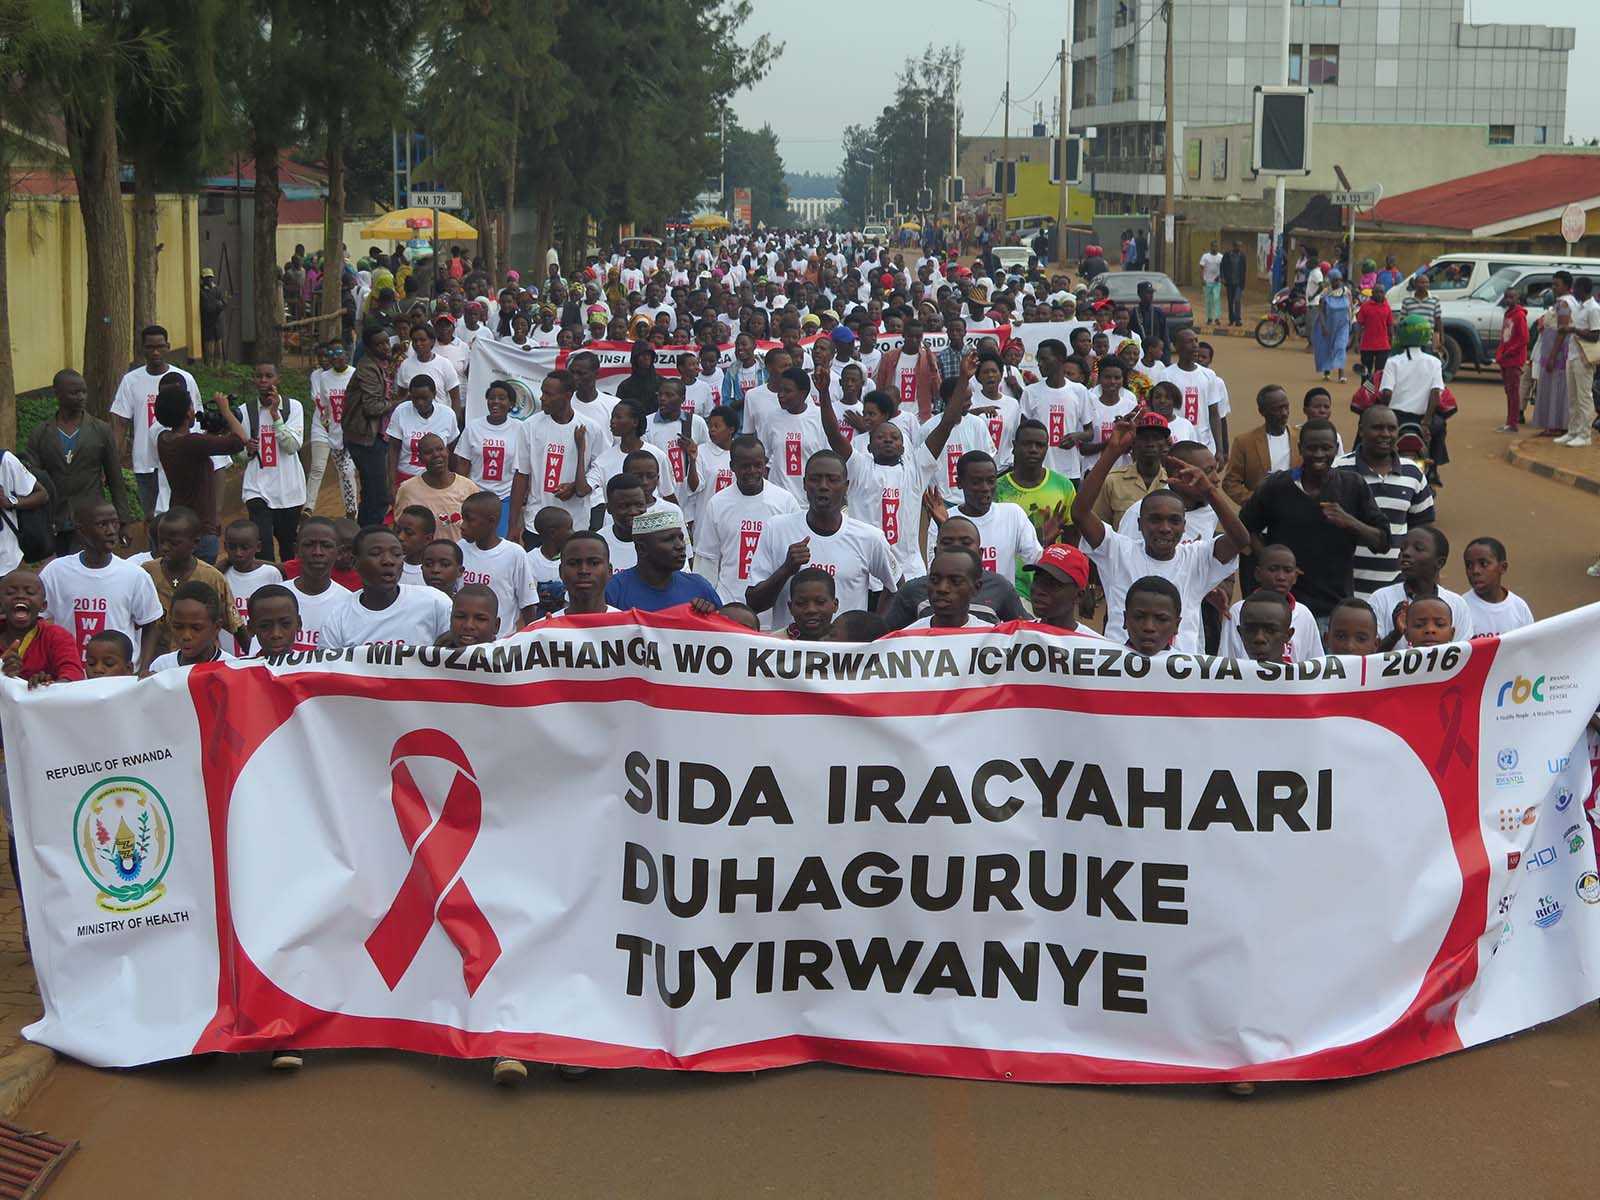 TOGETHER WE CAN END AIDS IN OUR LIFETIME